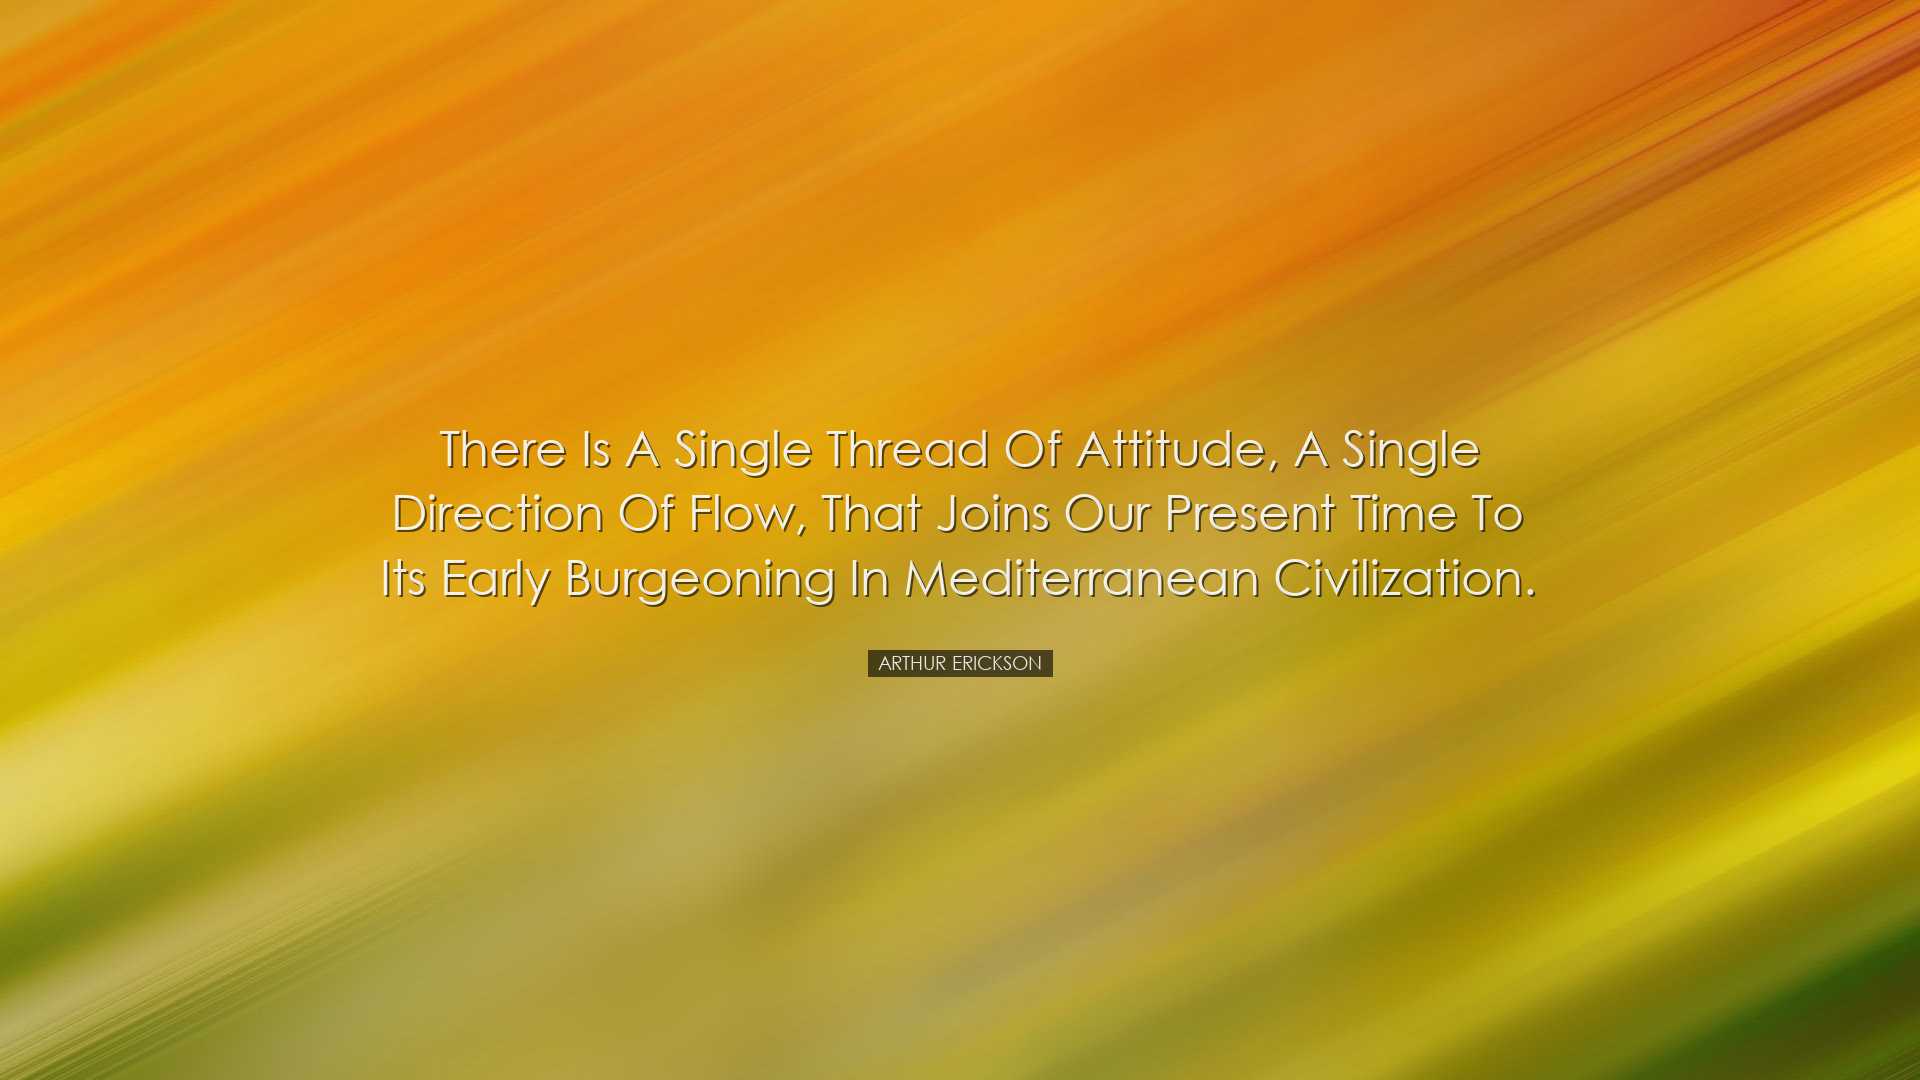 There is a single thread of attitude, a single direction of flow,